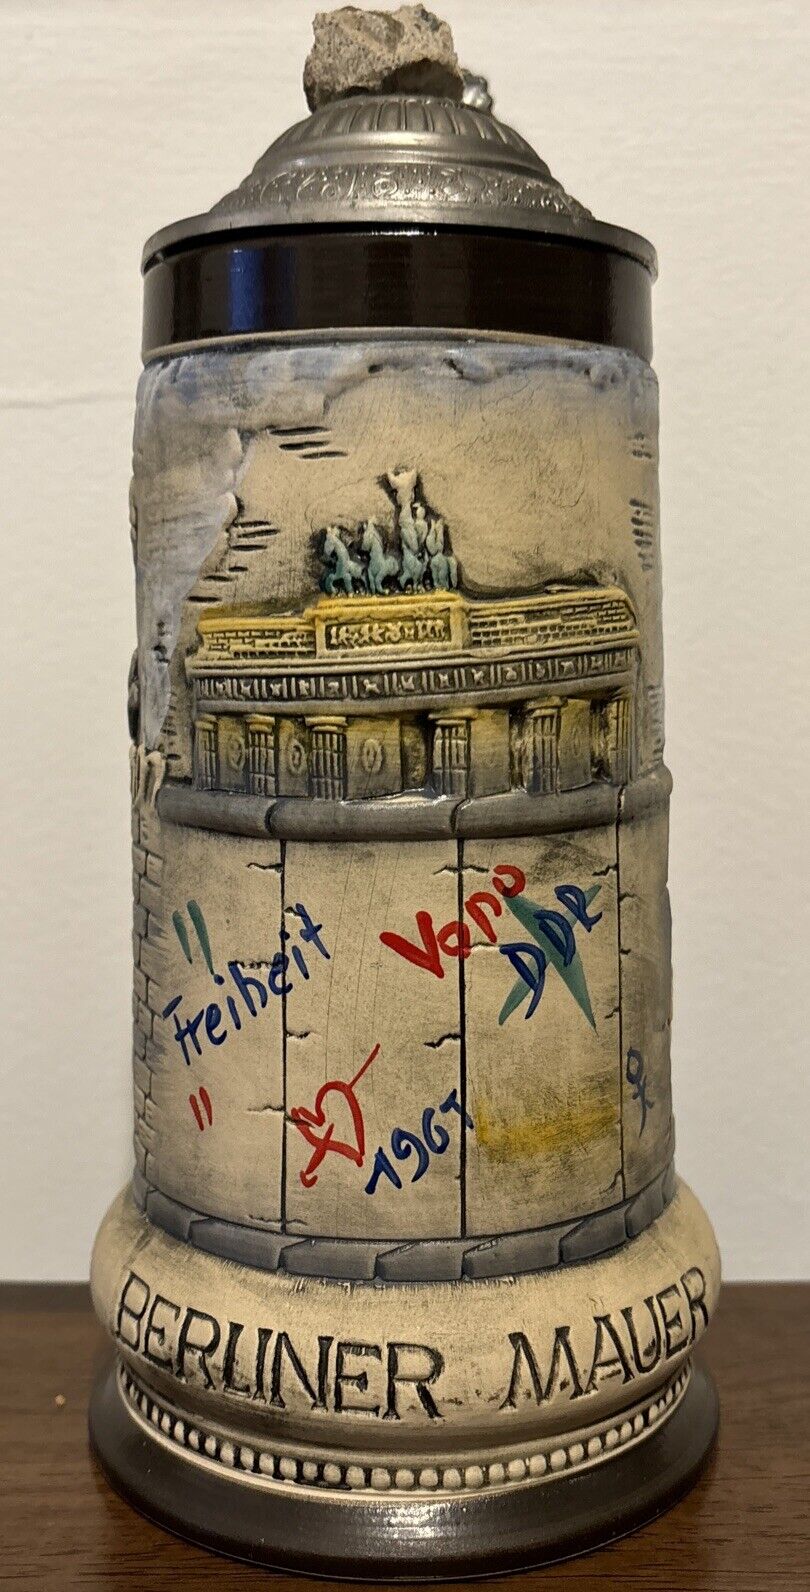 WW-TEAM BEER STEIN BERLIN WALL GERMANY Limited Edition 449/4000 Historic Antique